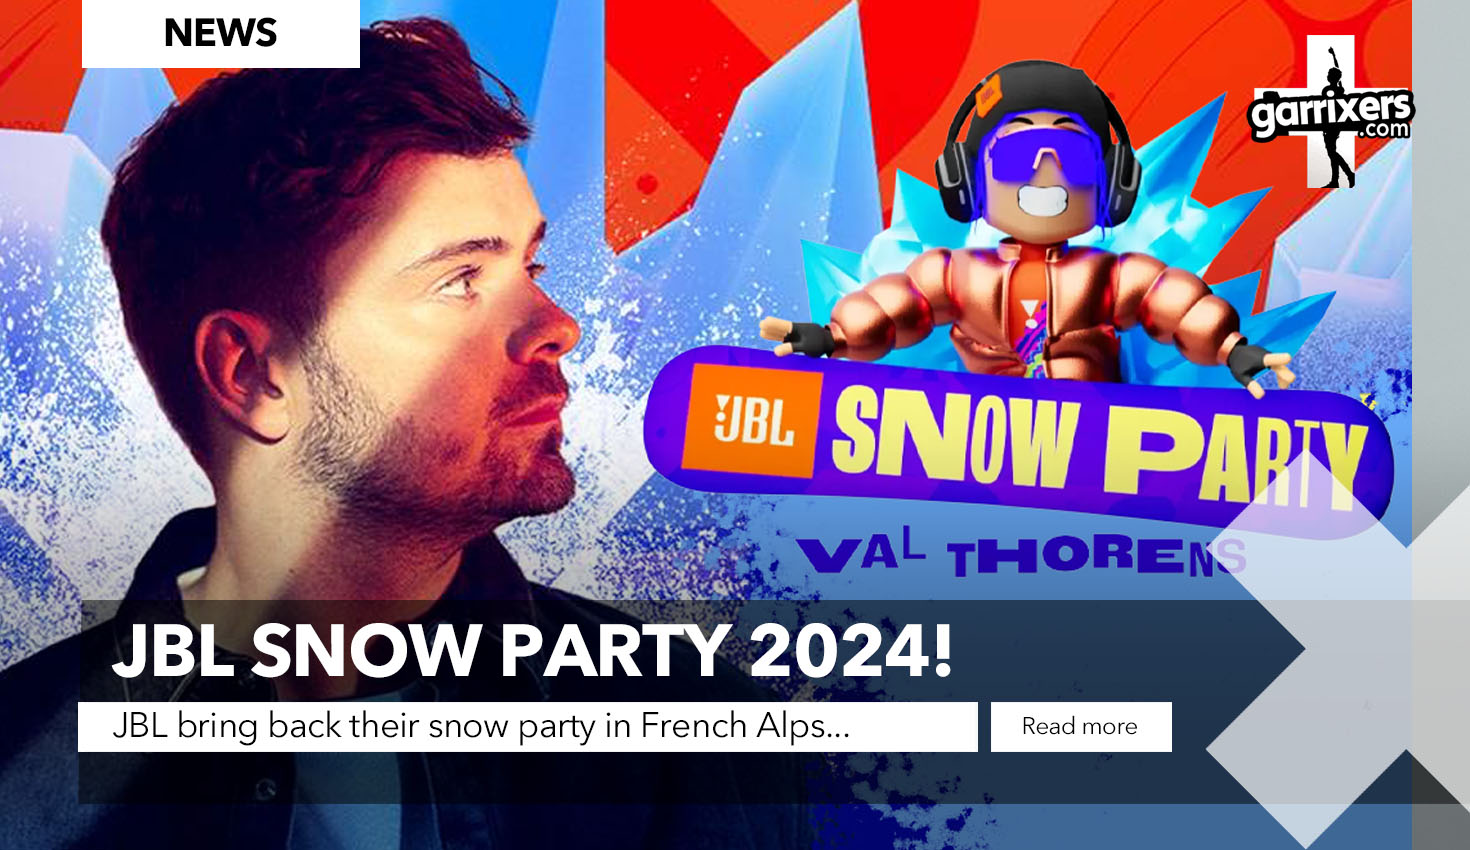 JBL Snow Party 2024 on garrixers.com